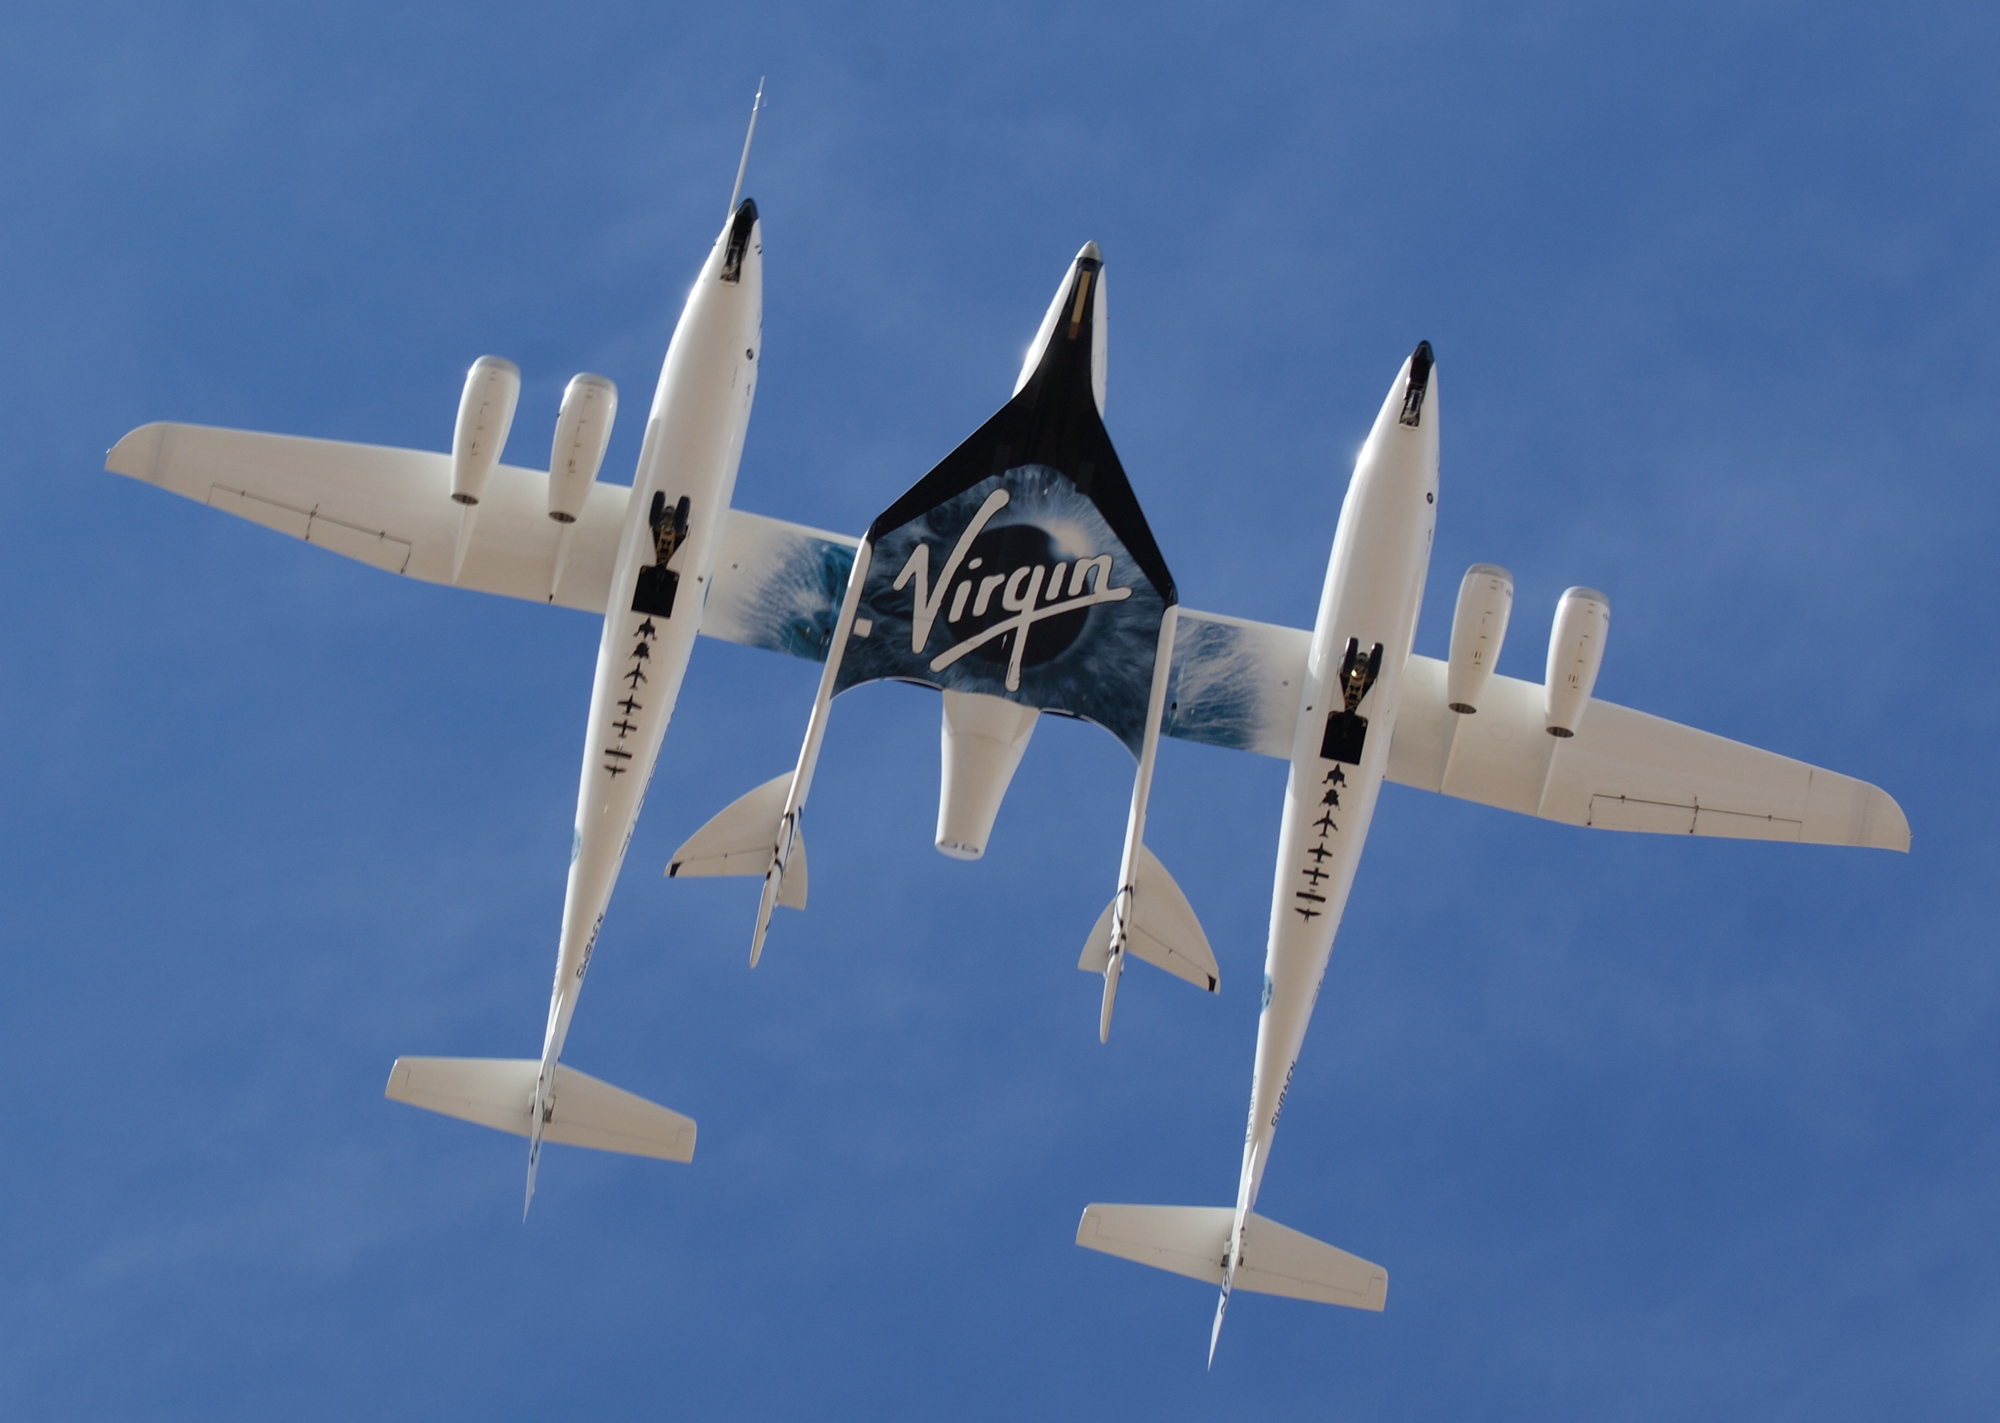 What’s Next For Virgin Galactic?